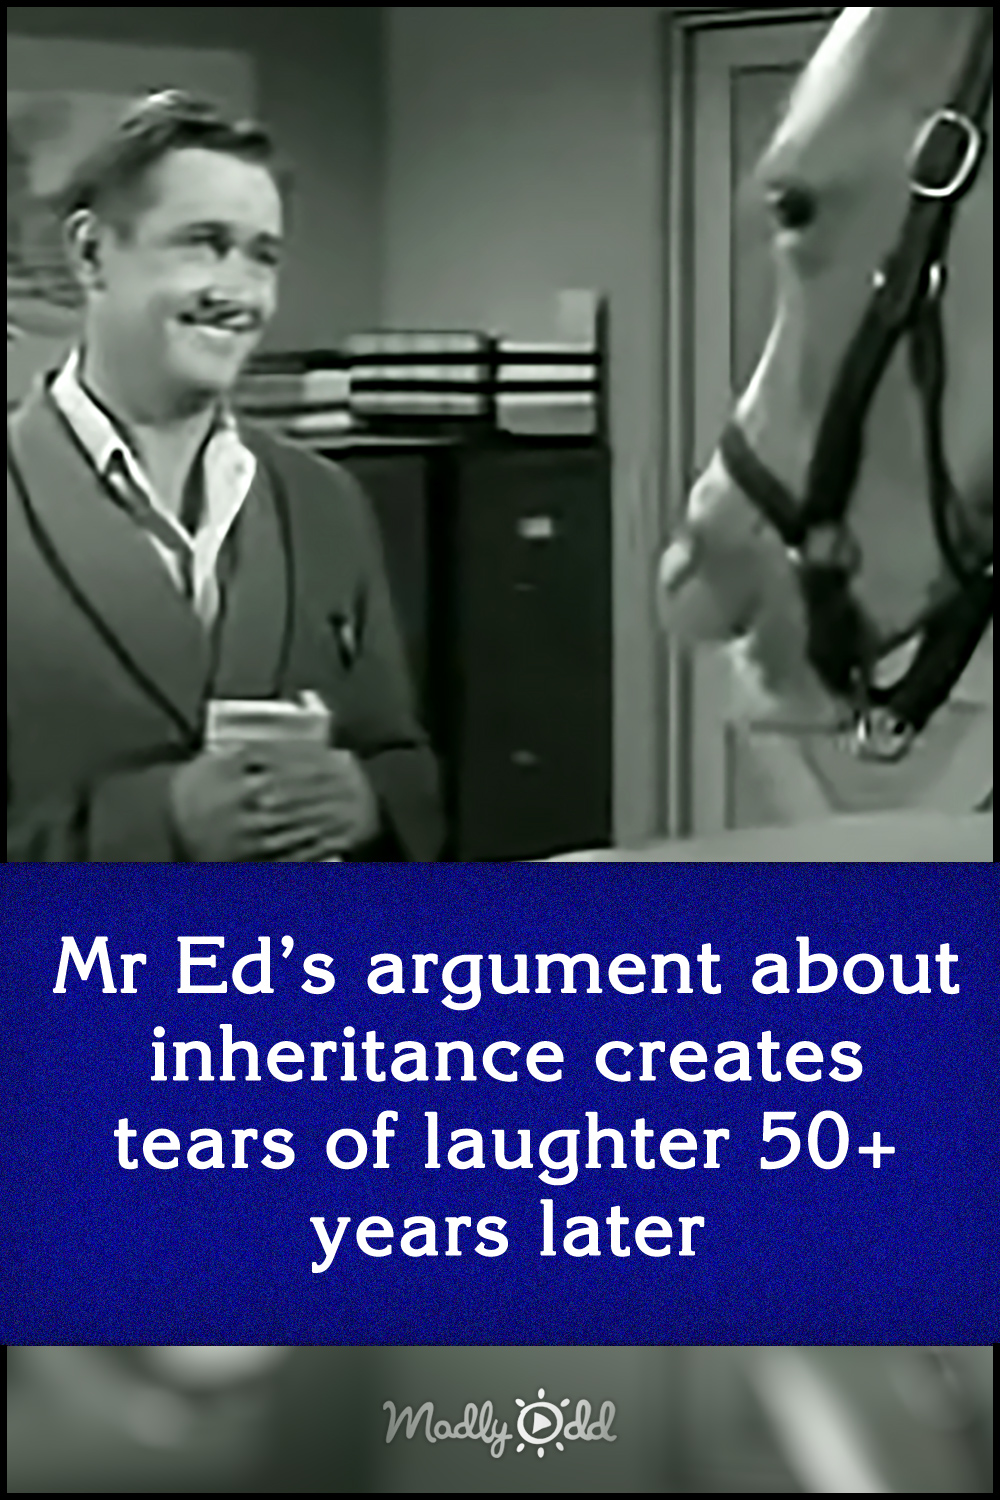 Mr Ed’s argument about inheritance creates tears of laughter 50+ years later